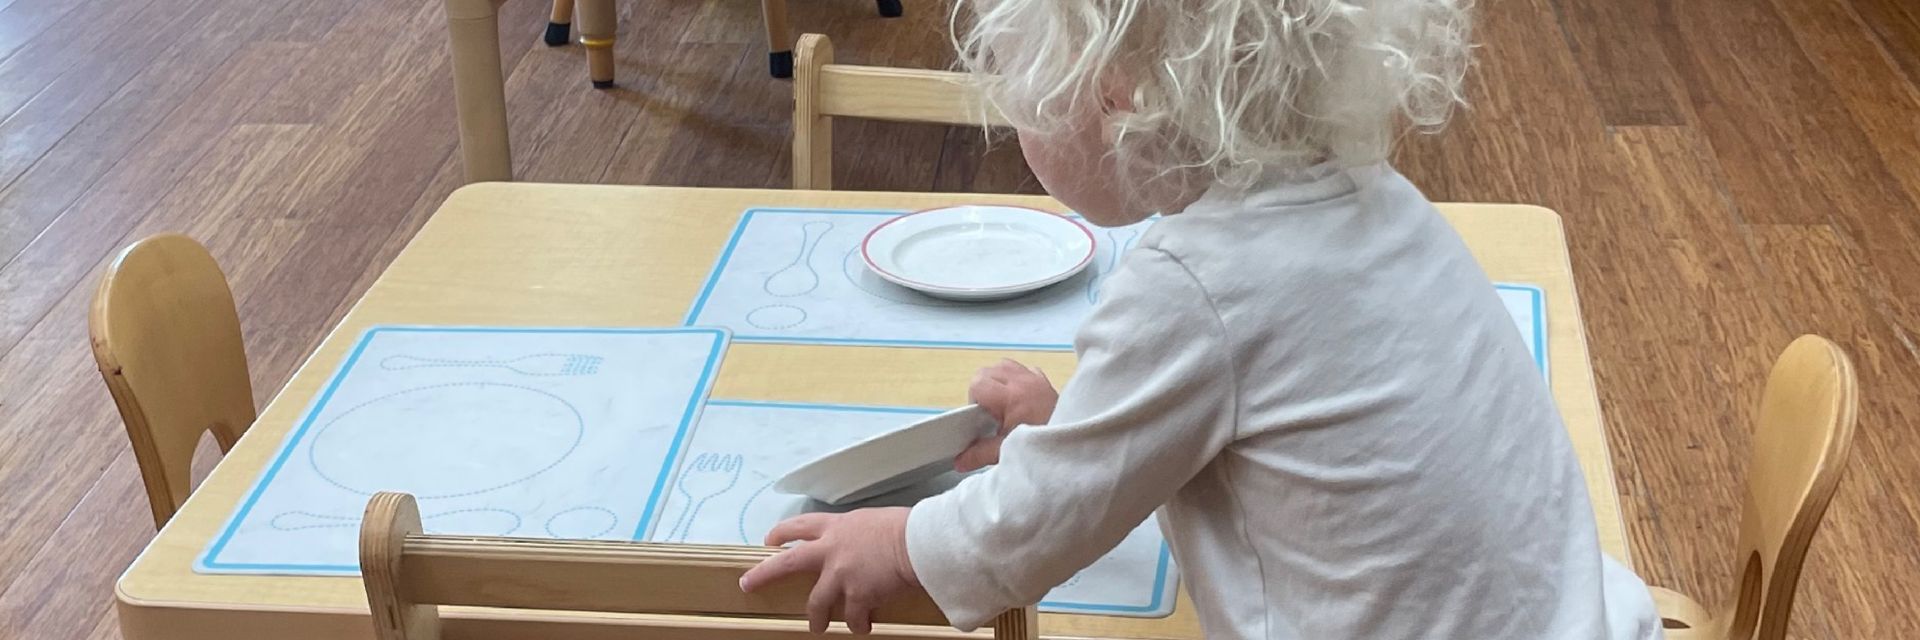 Image of a toddler aged child placing a plate onto a table using placemats with place setting diagrams